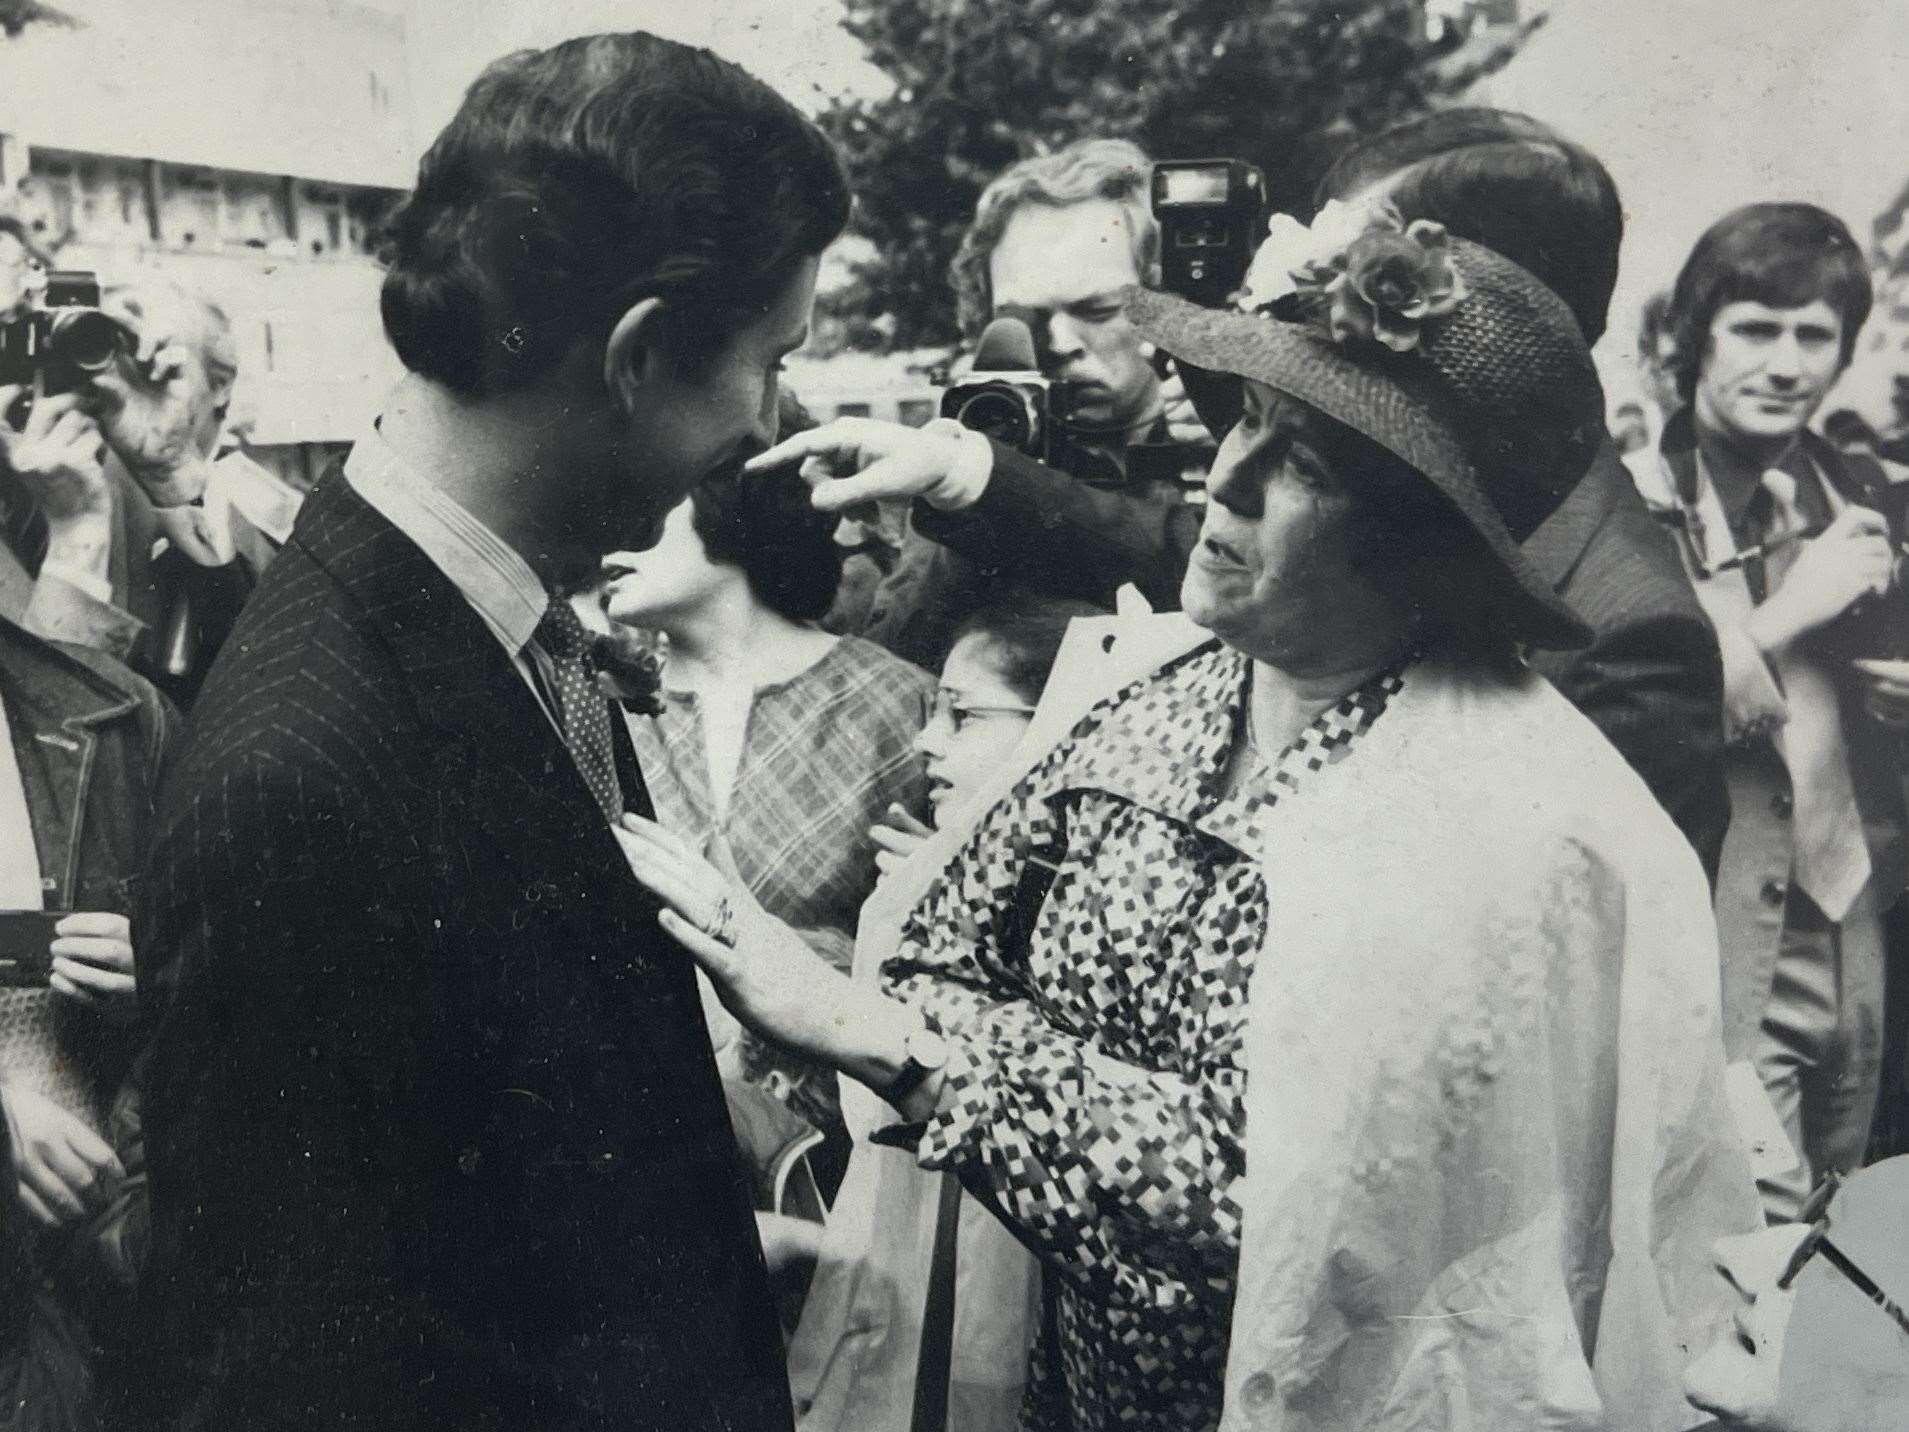 Kathy Martin touching Prince Charles's tie in 1981